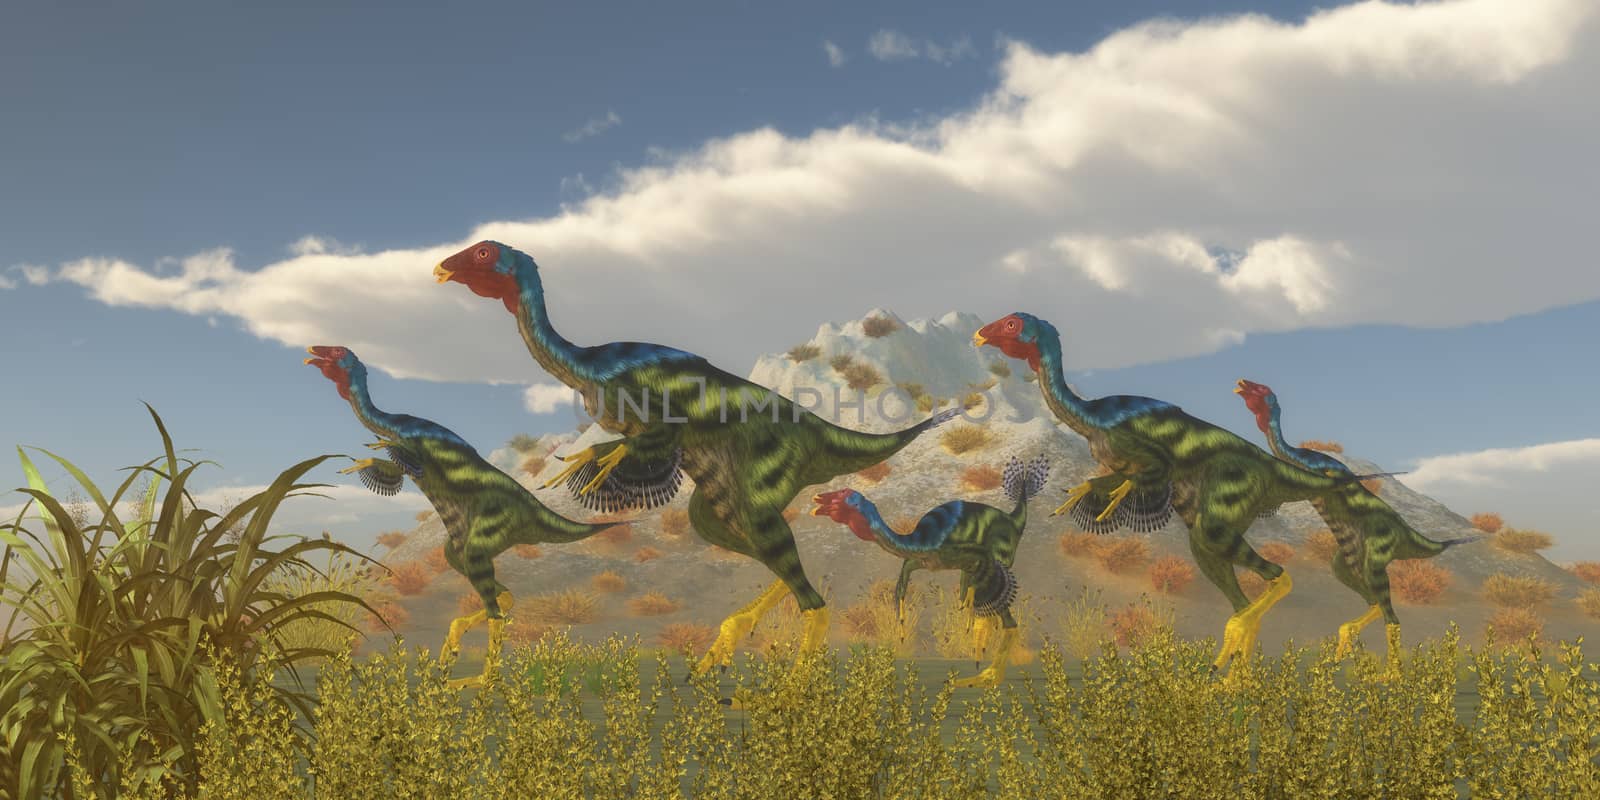 Caudipteryx was a dinosaur reptile bird that lived in China in the Cretaceous Period.